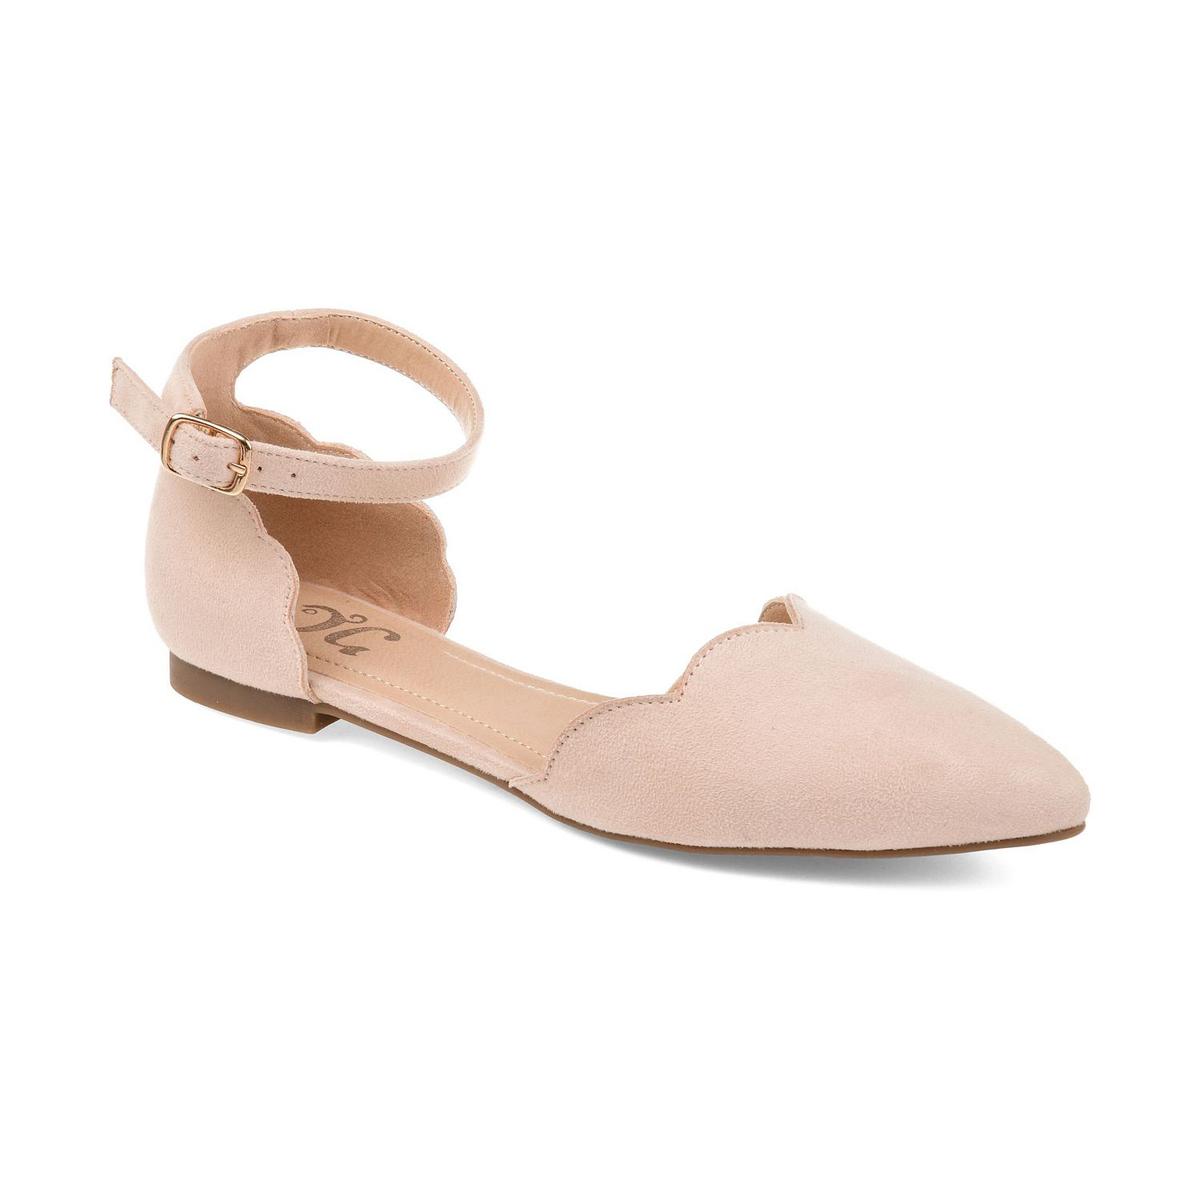 Journee Collection Womens Lana Faux Suede D'Orsay Flats Shoes BHFO 9213 ...